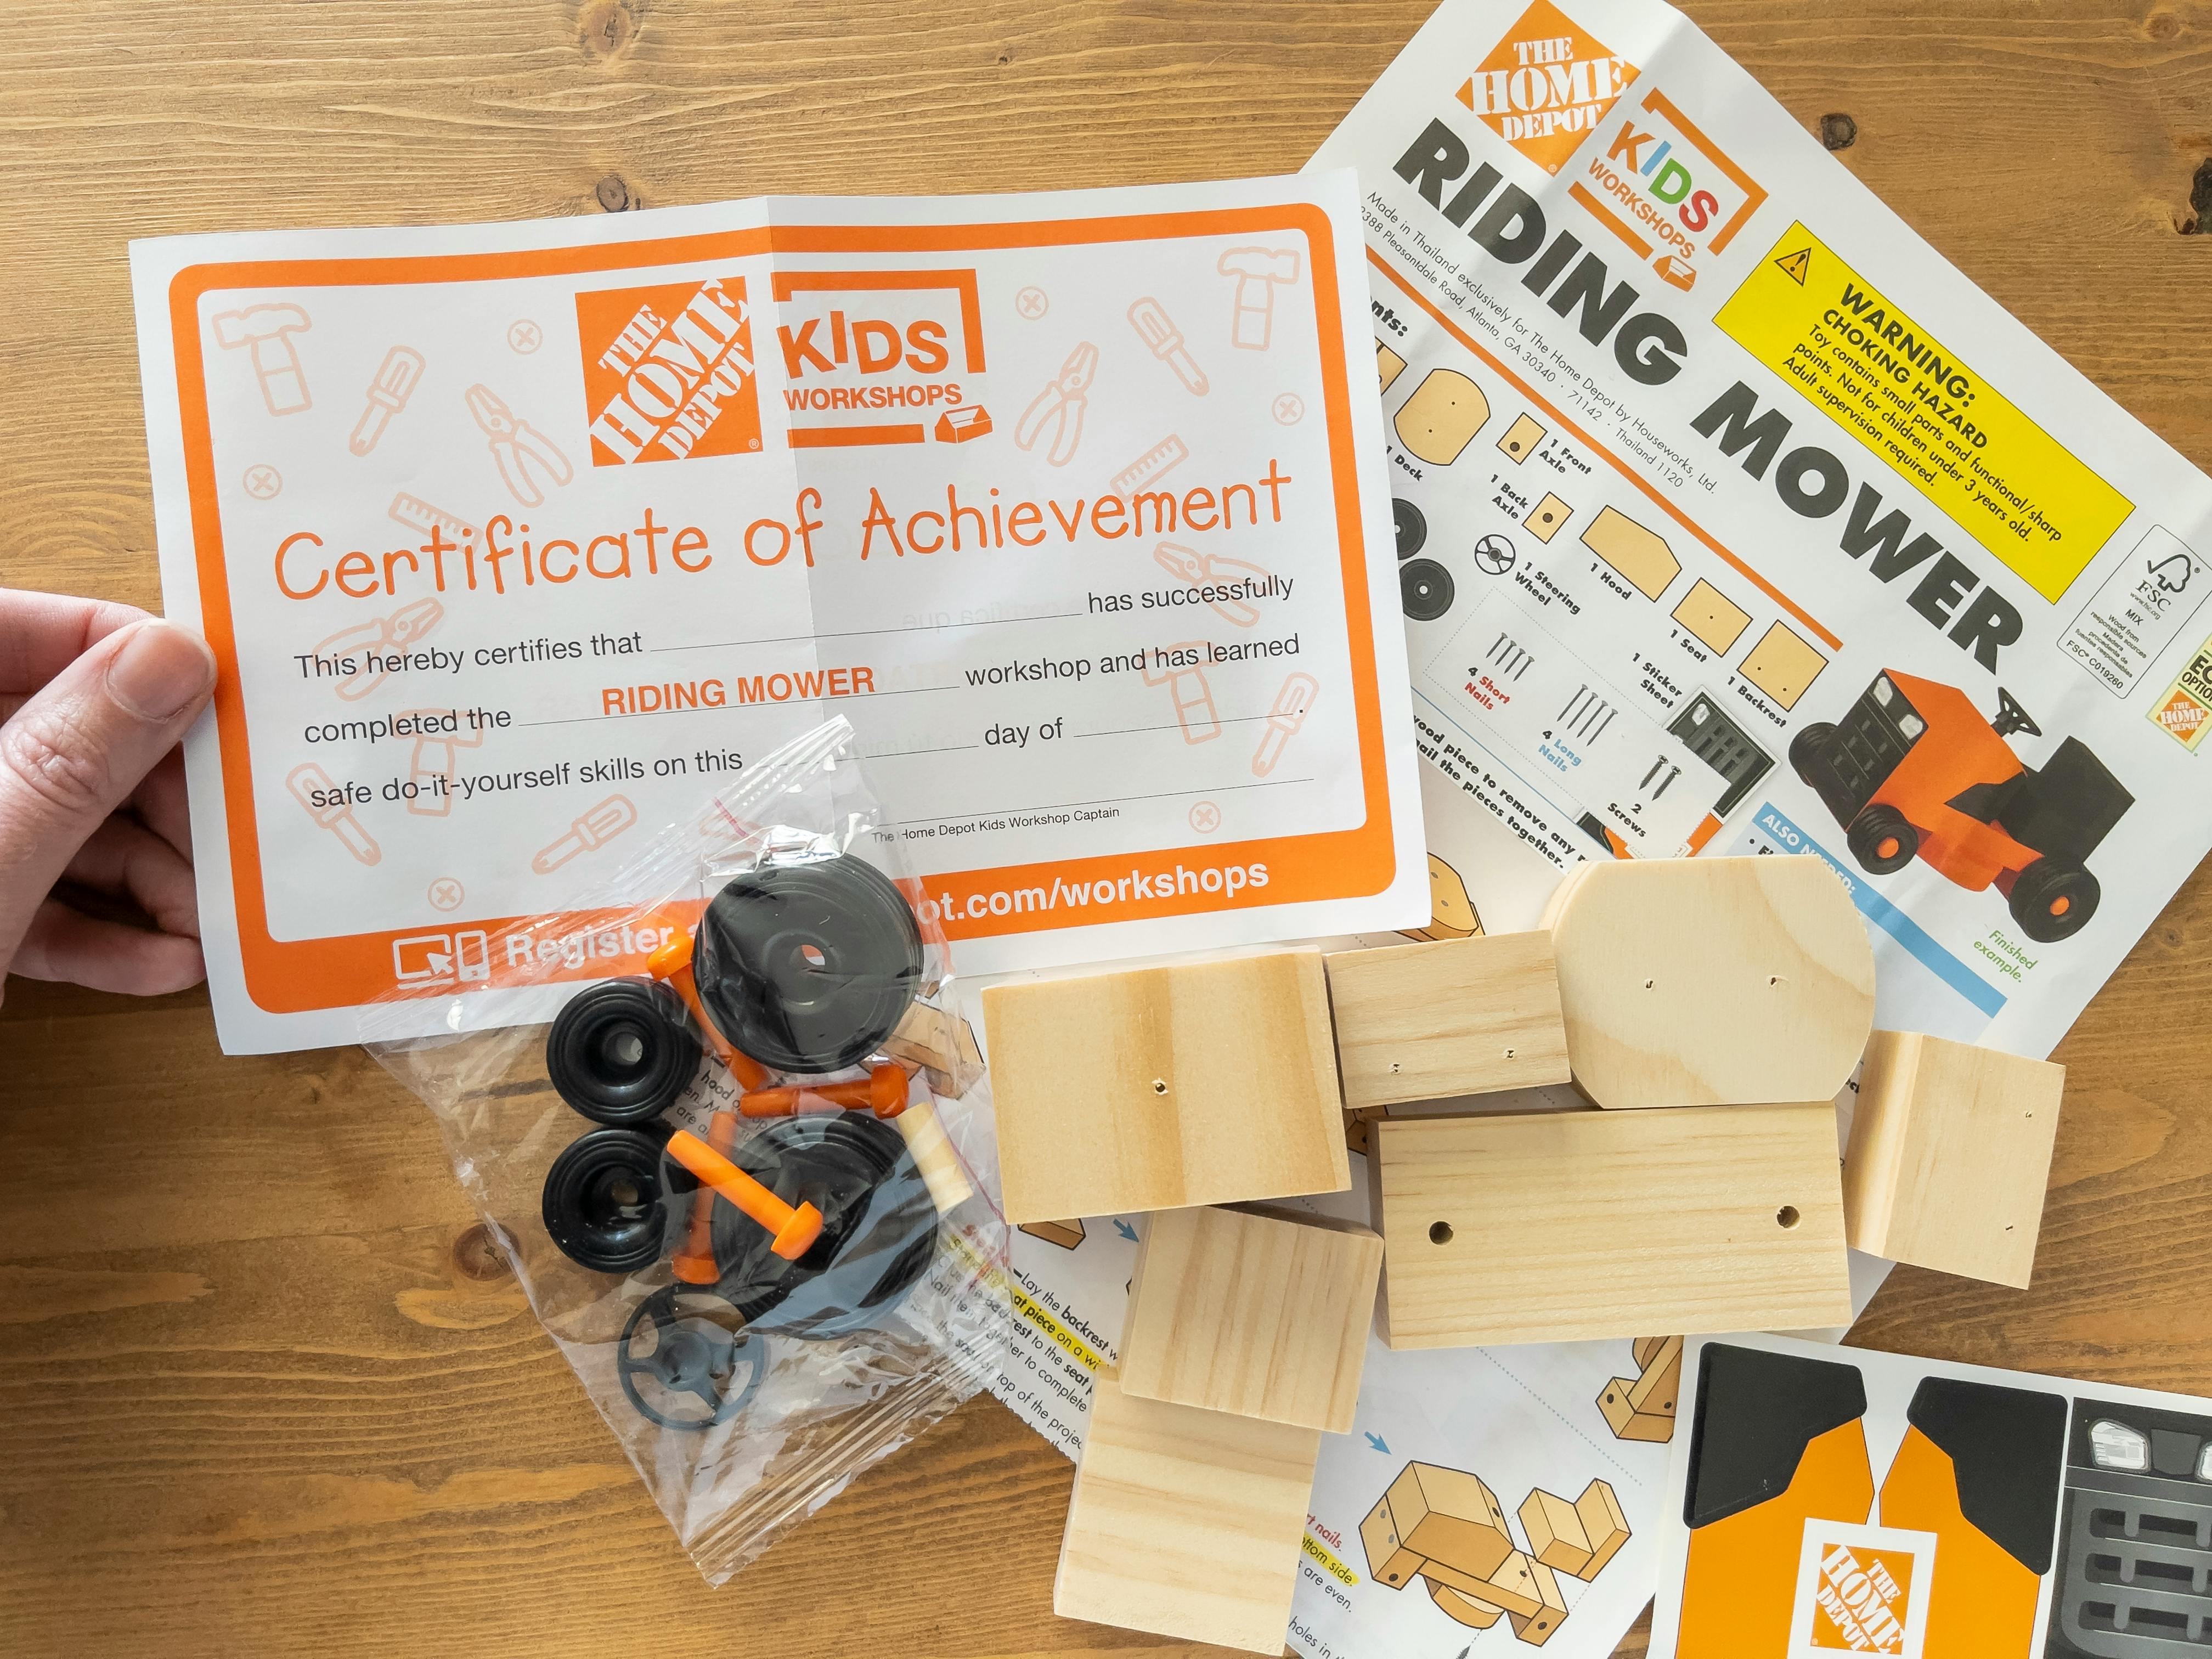 A Home Depot Kids Workshops Riding Mower kit open on a table.